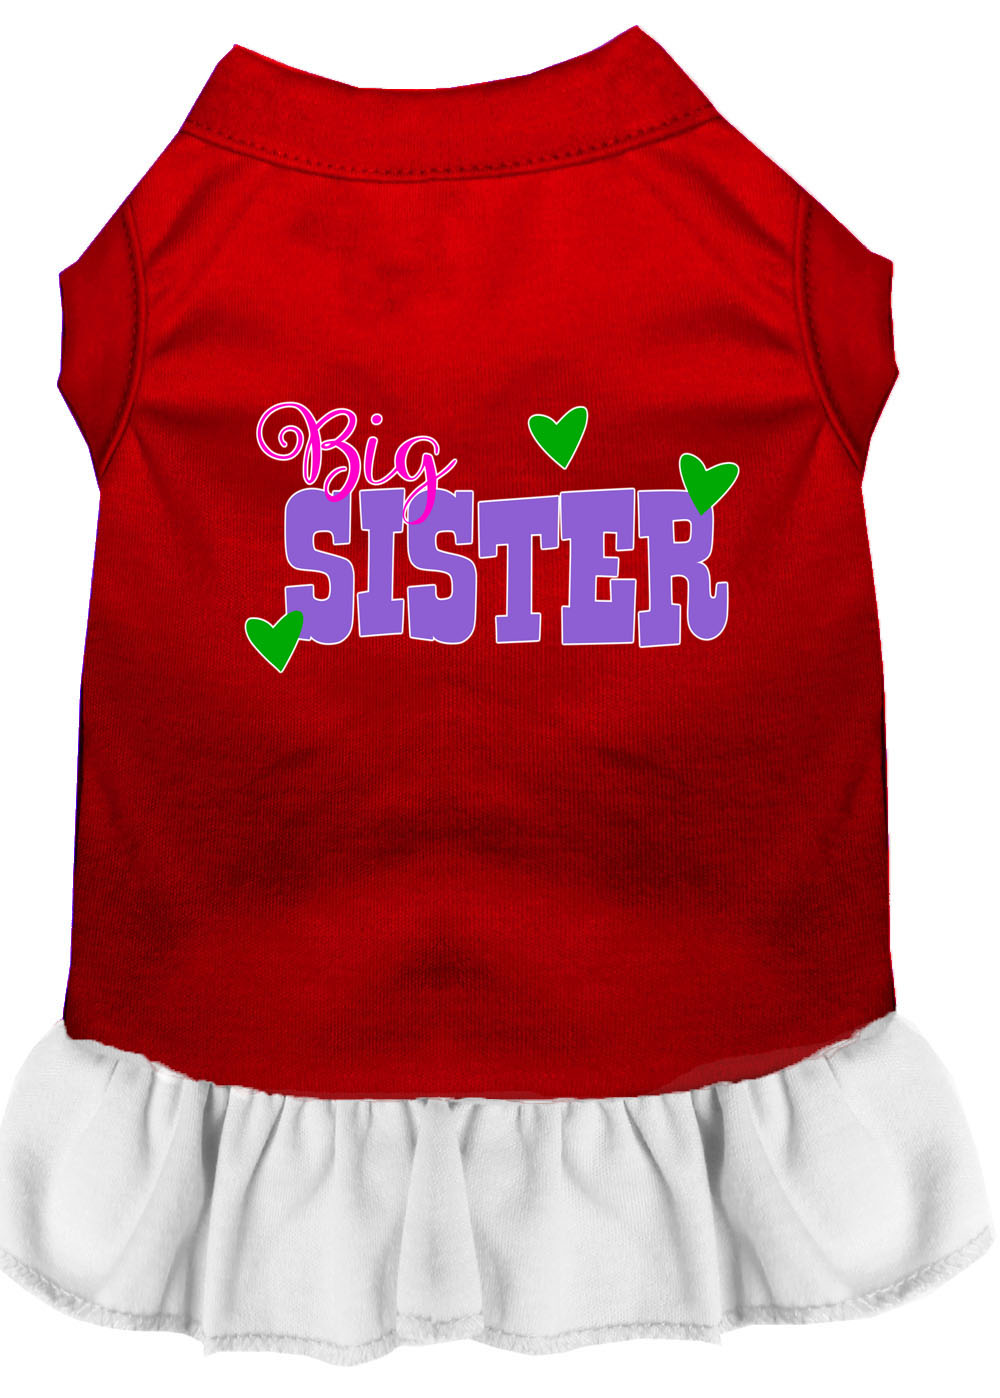 Big Sister Screen Print Dog Dress Red with White XS